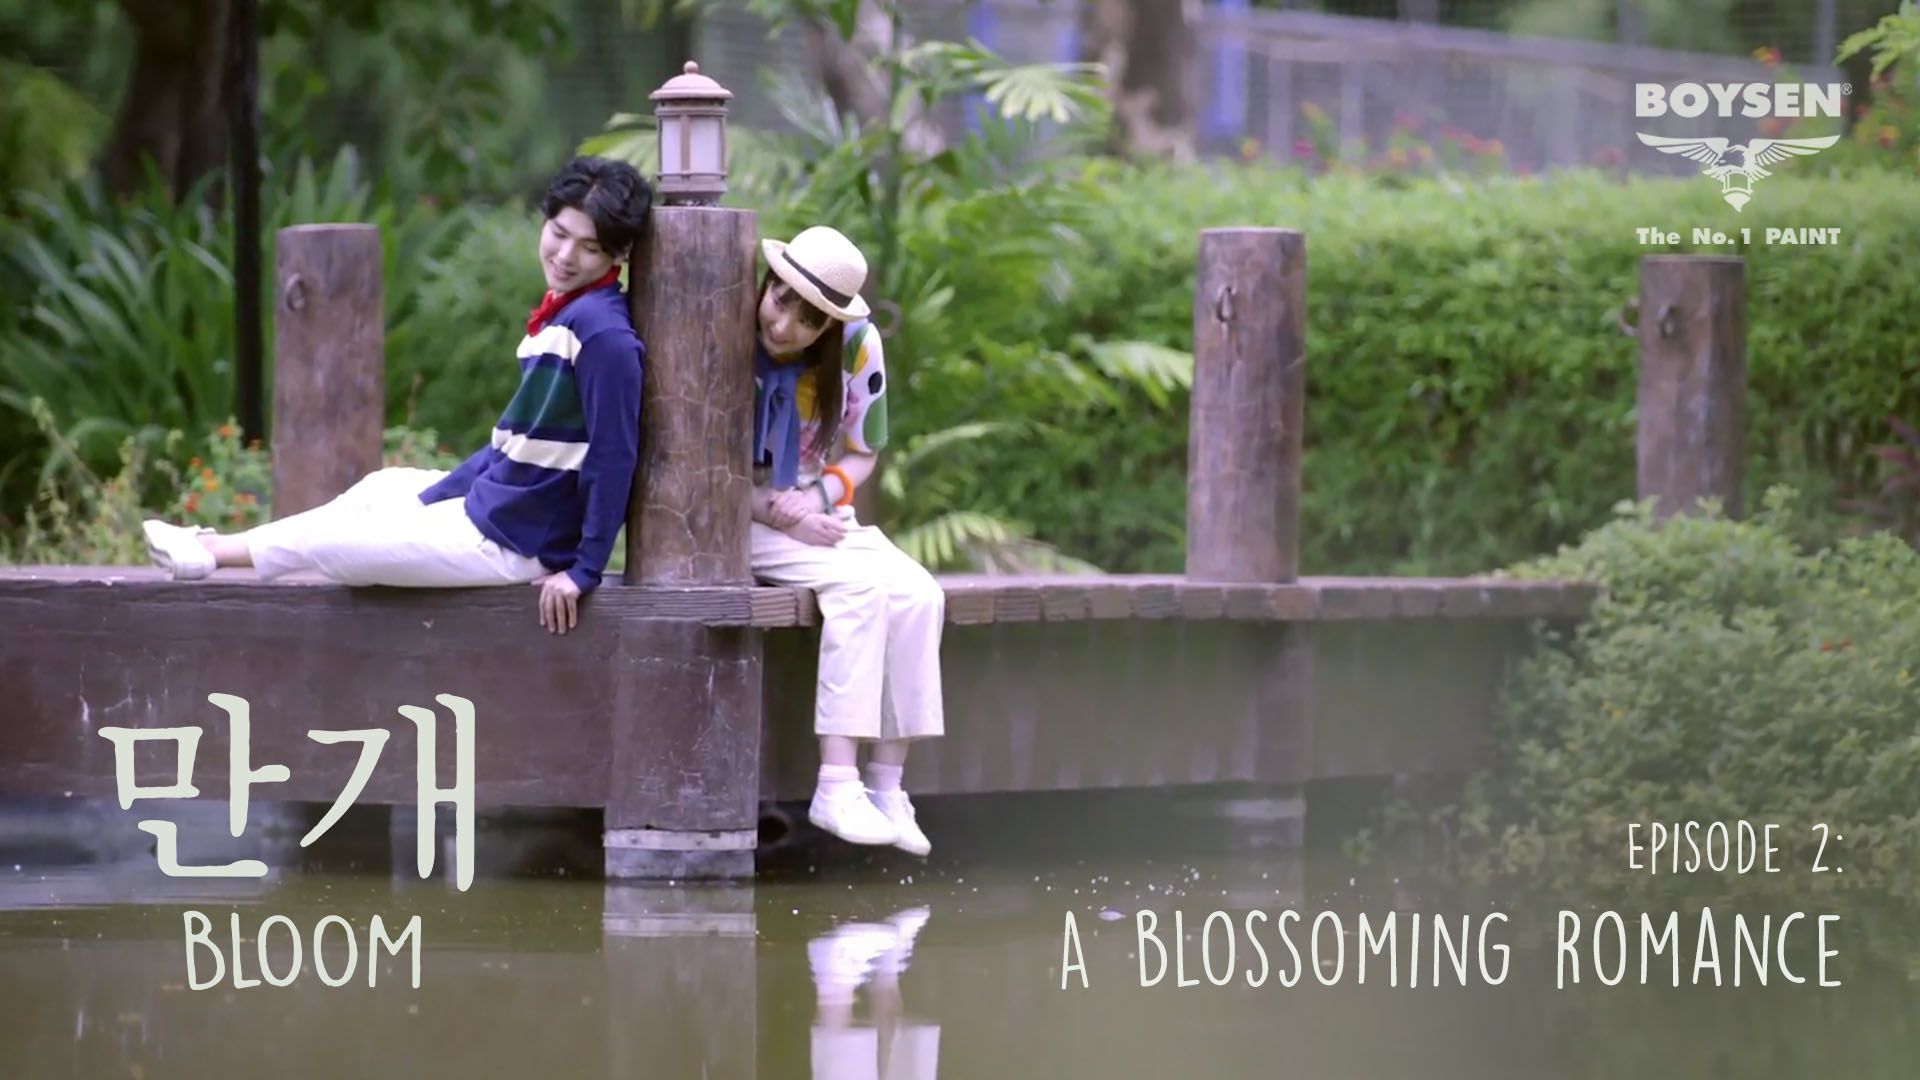 Episode 2 “A Blossoming Romance”